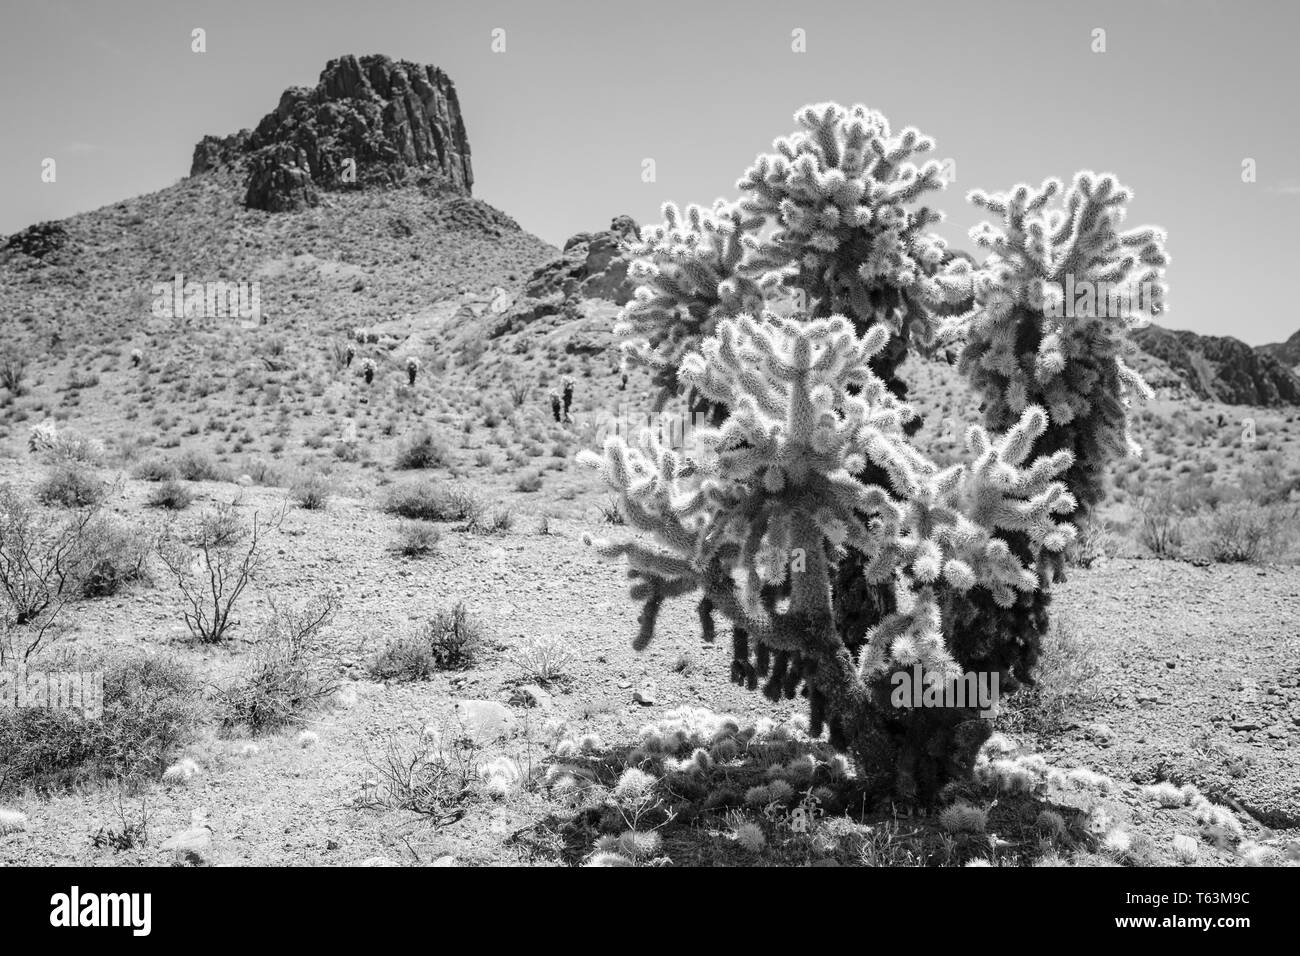 Black and white picture of Teddy bear Cholla (Cylindropuntia bigelovii) cactus on a desert area in Arizona, USA Stock Photo